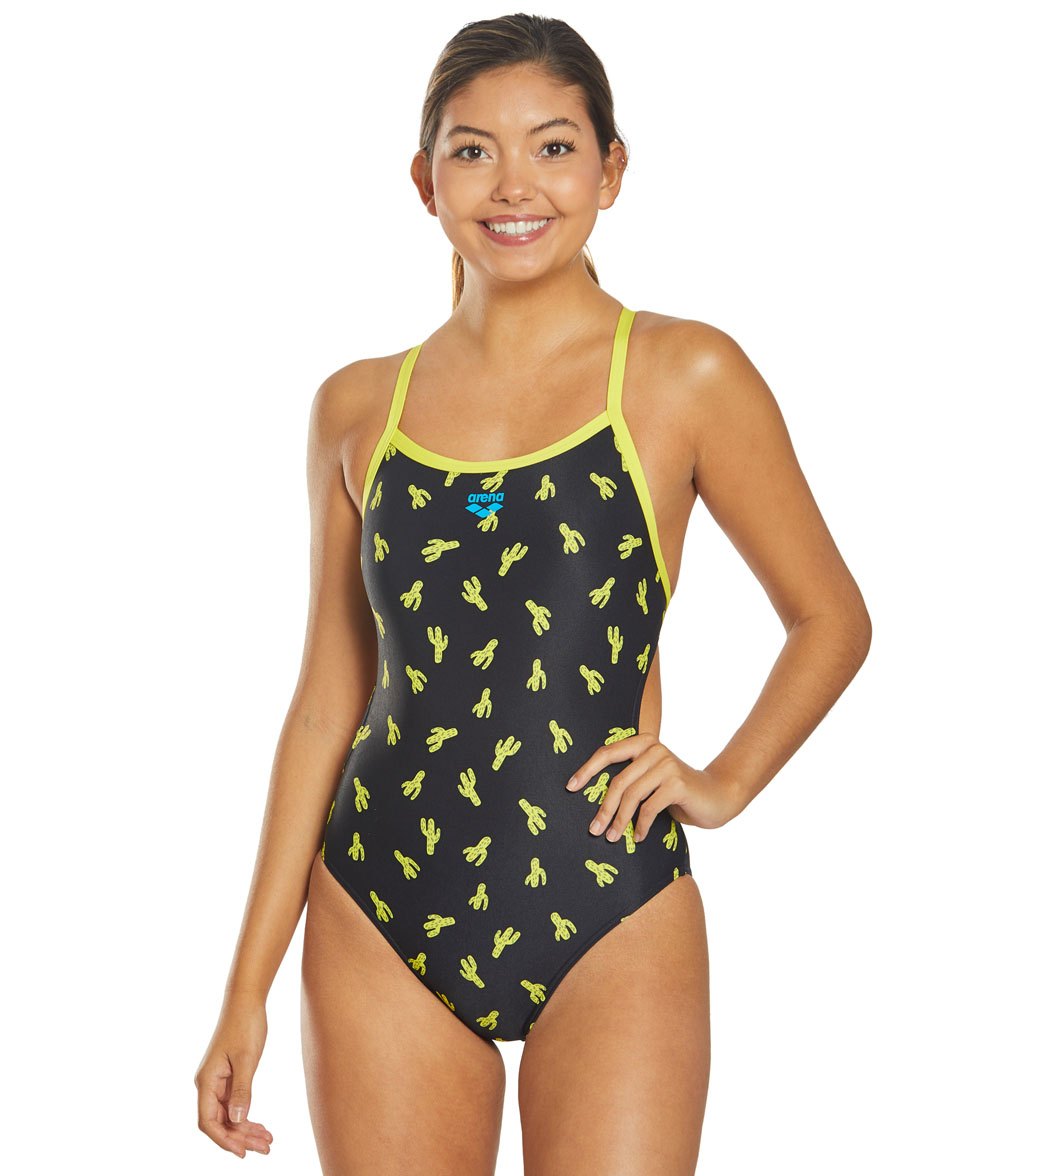 Arena Women's Cactus Challenge Back One Piece Swimsuit - Black/Yellow Star 22 Polyester - Swimoutlet.com